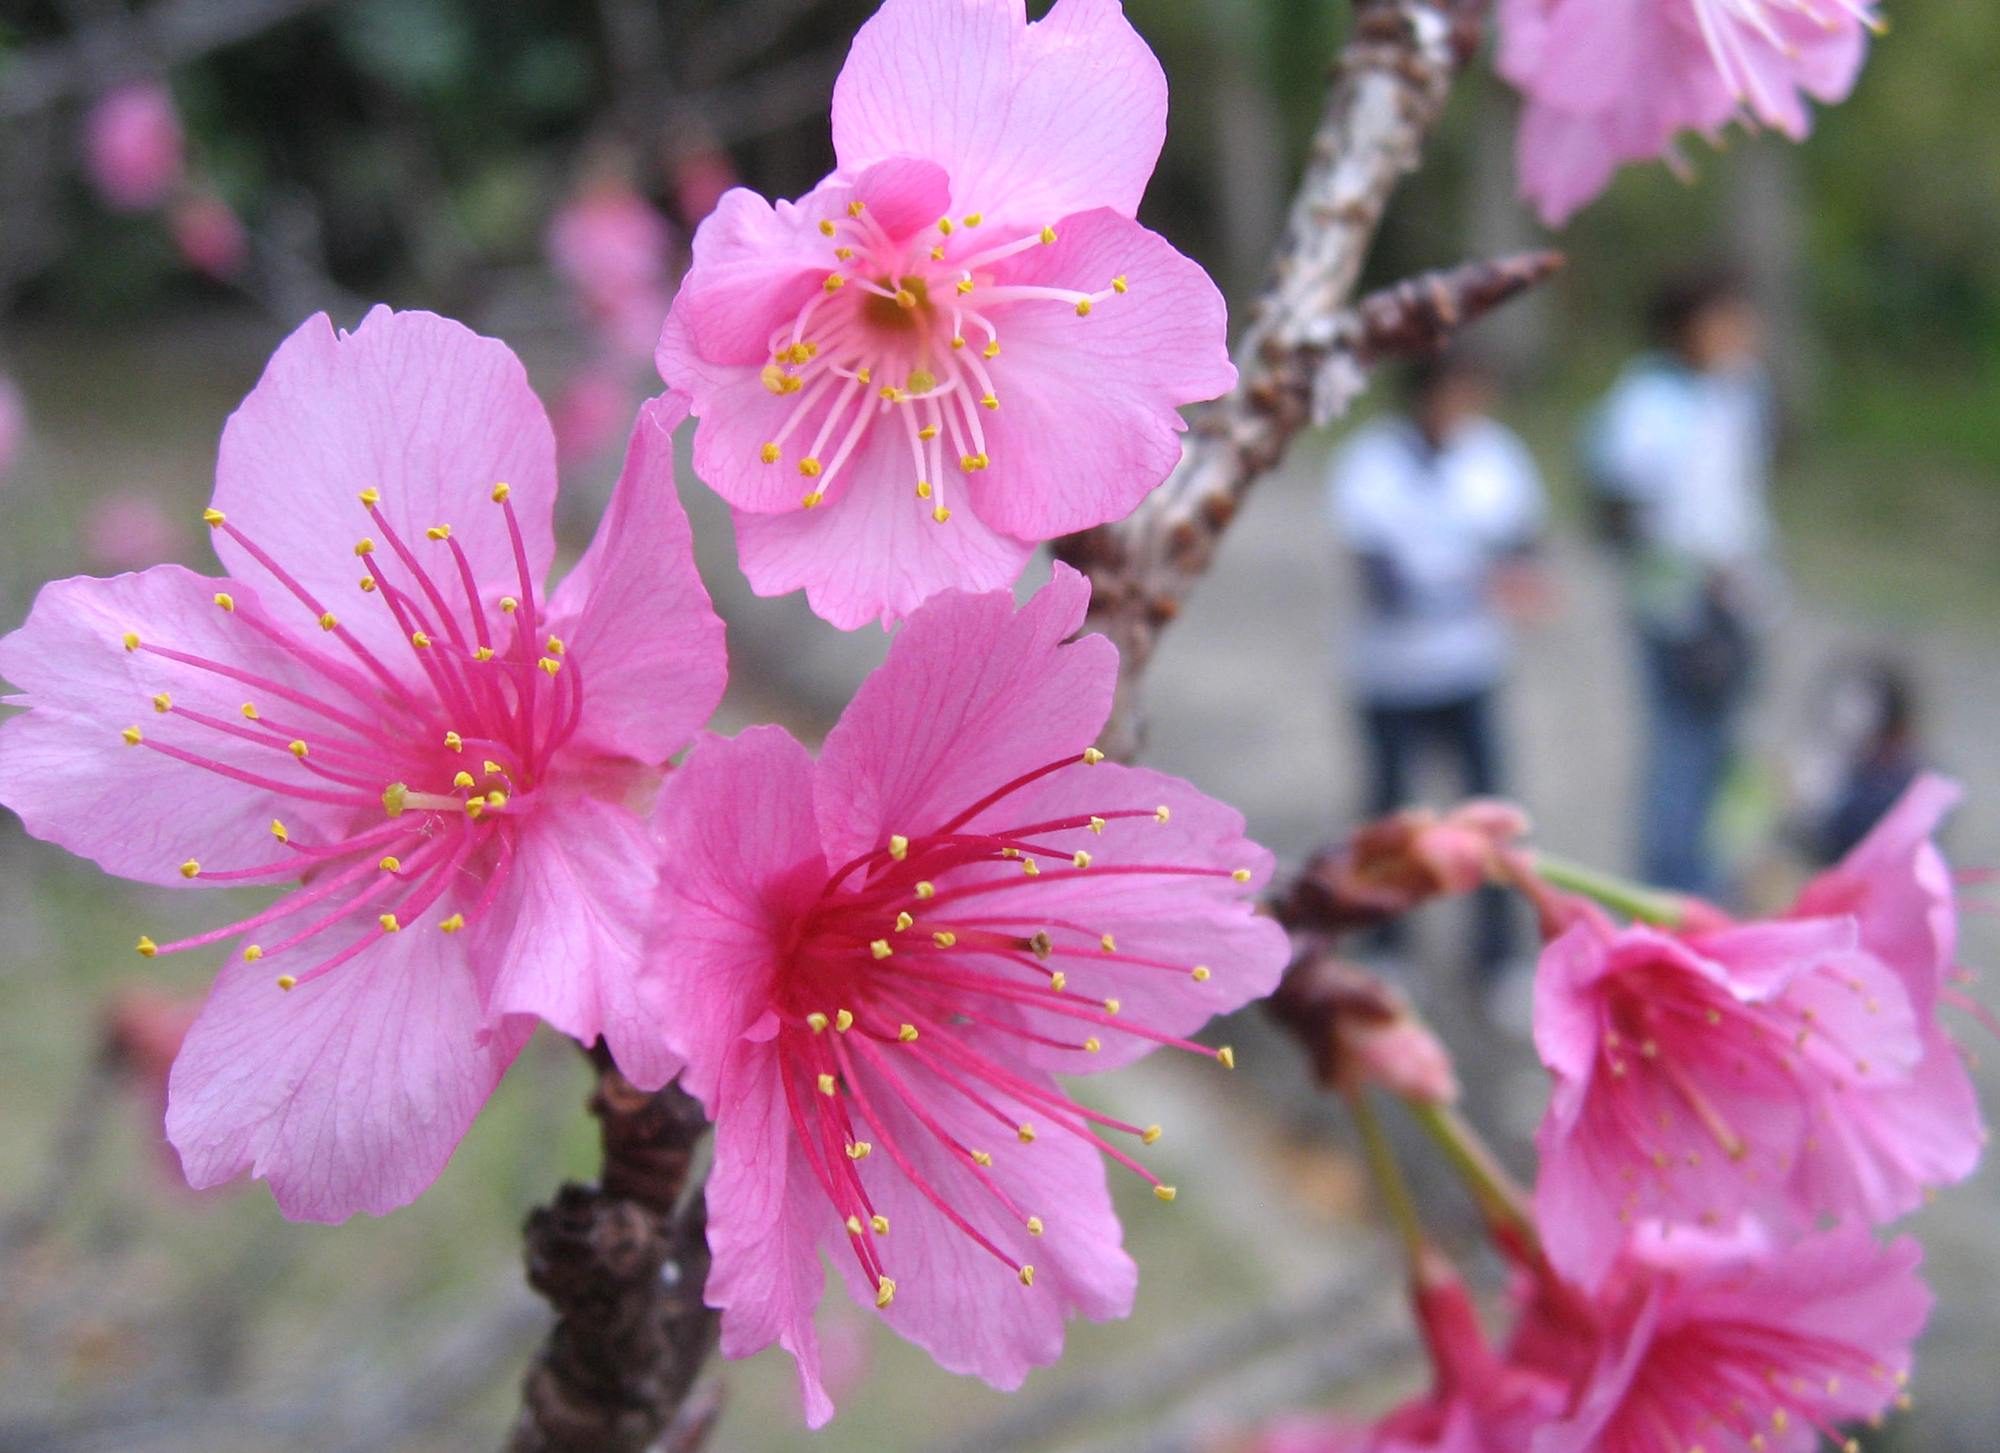 It’s February, and Okinawa Is Abloom With Cherry Blossoms